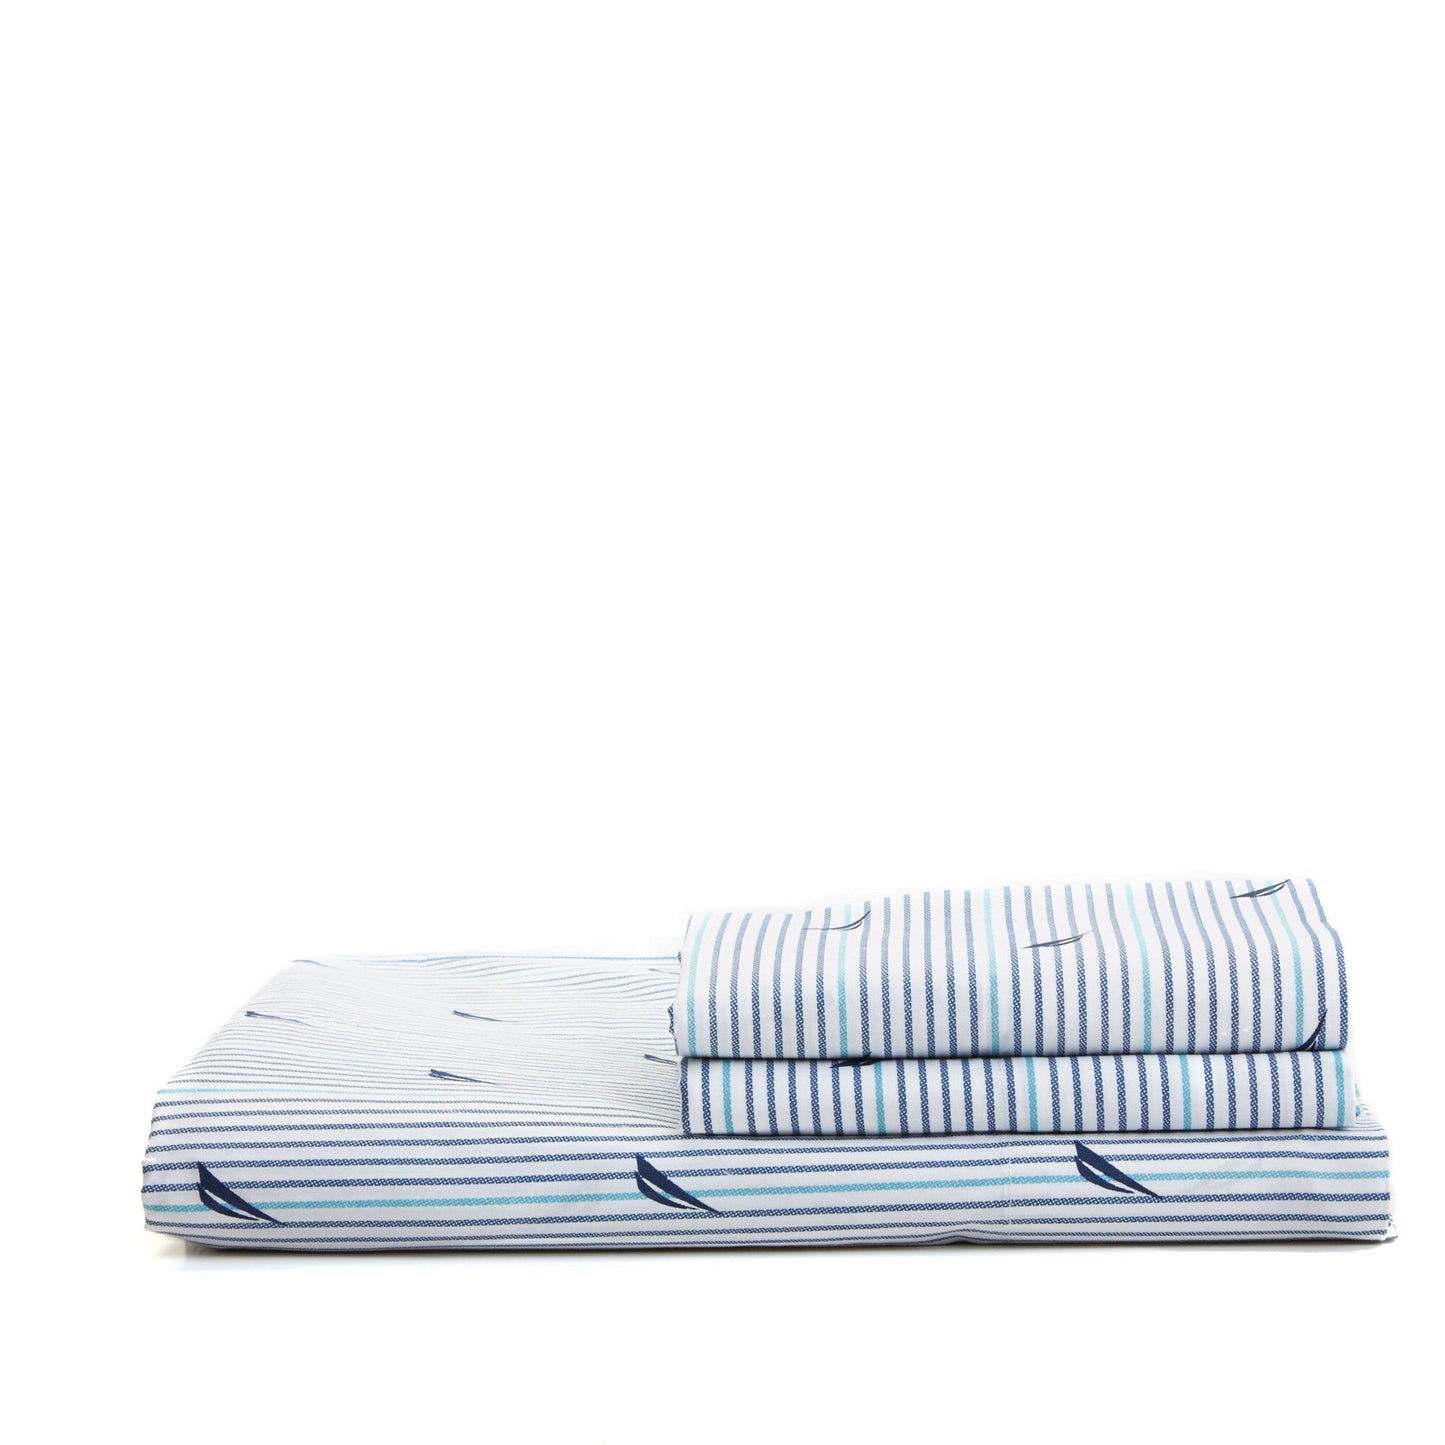 Nautica Sailboat Sheet Set - Queen - for Home or Cottage